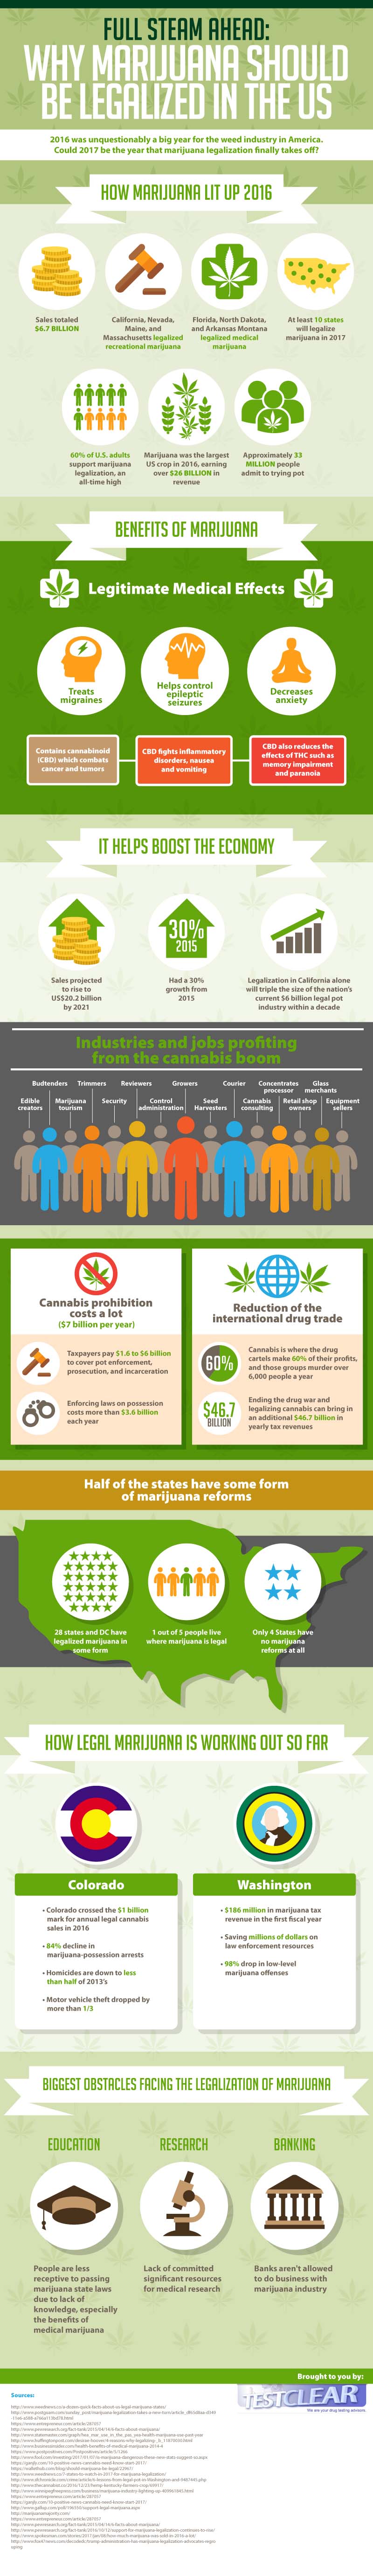 Why Marijuana Should Be Legalized In The US